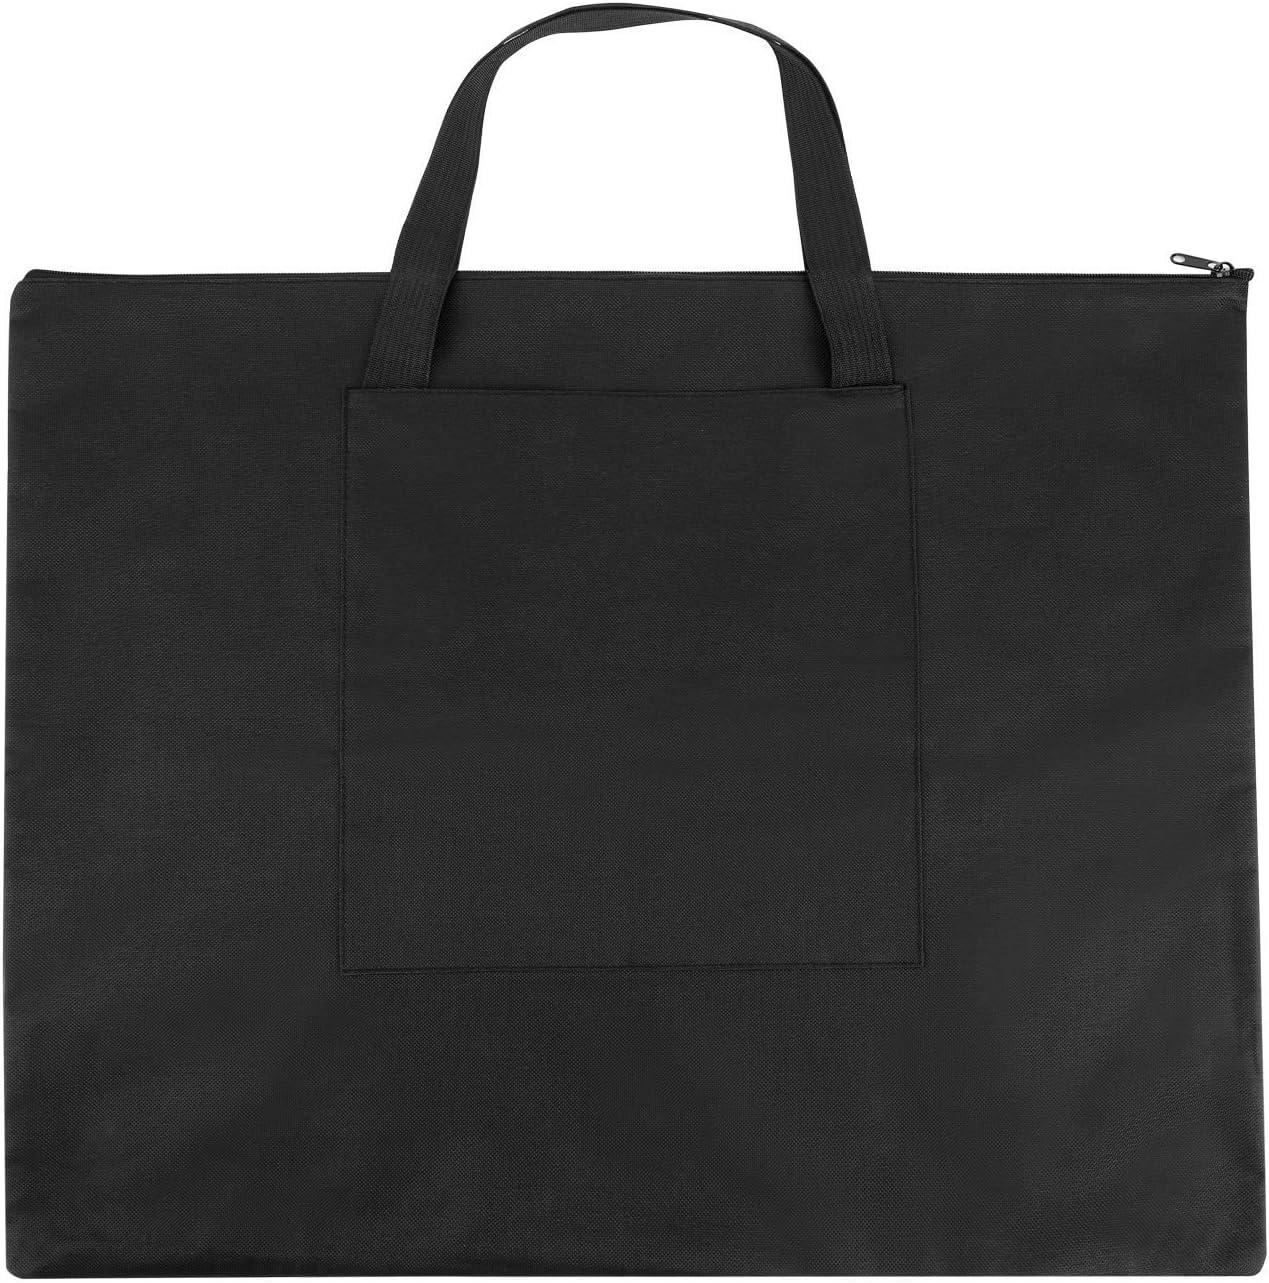 24 Pack Blank Canvas Tote Bags Black Lightweight Reusable Canvas Bags A2